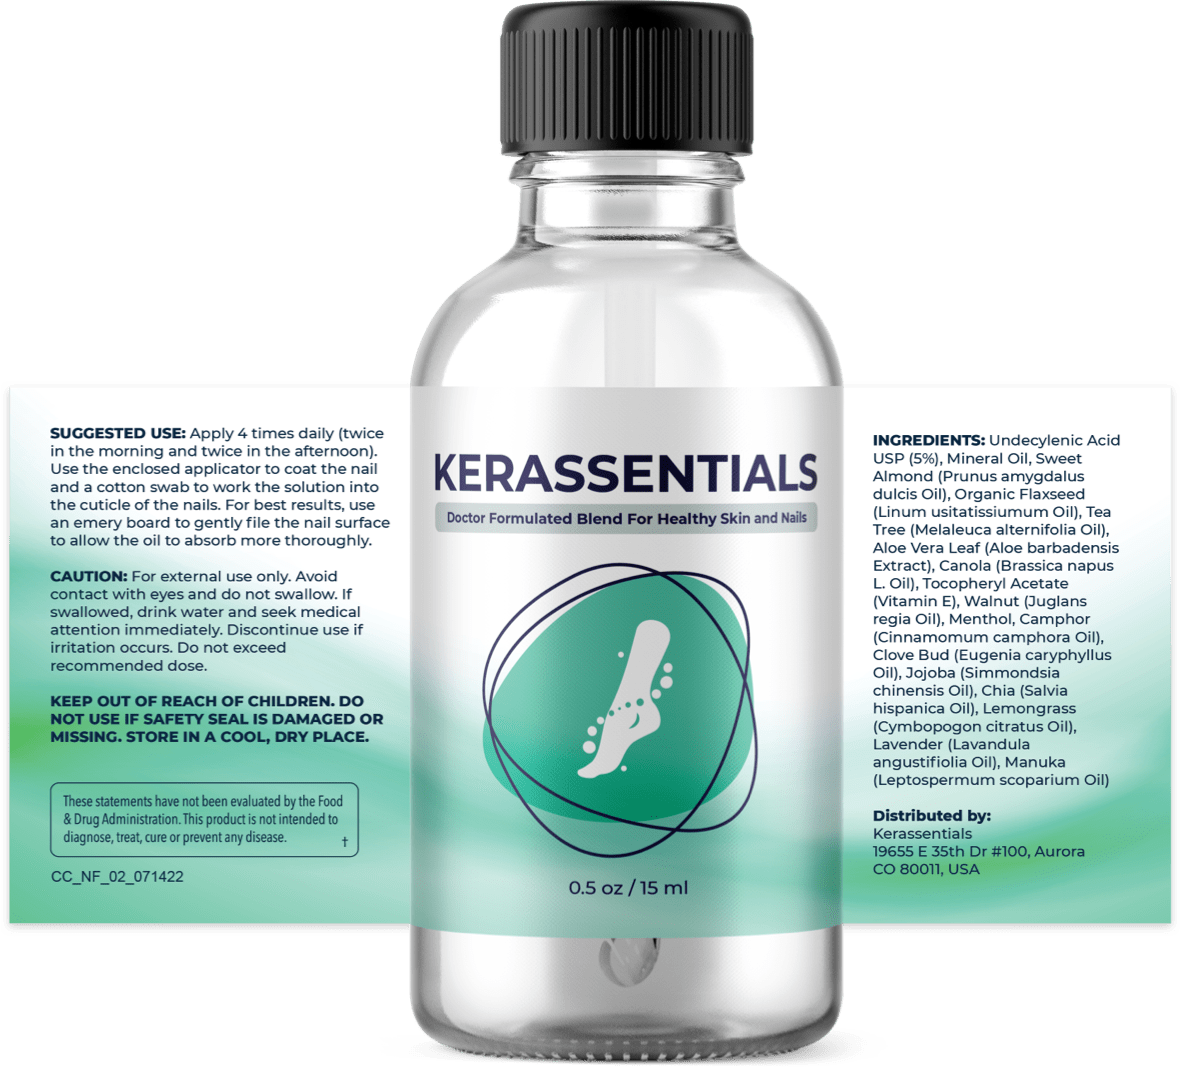 Kerassentials: All-natural nail and skin solution for fungal infection prevention and treatment